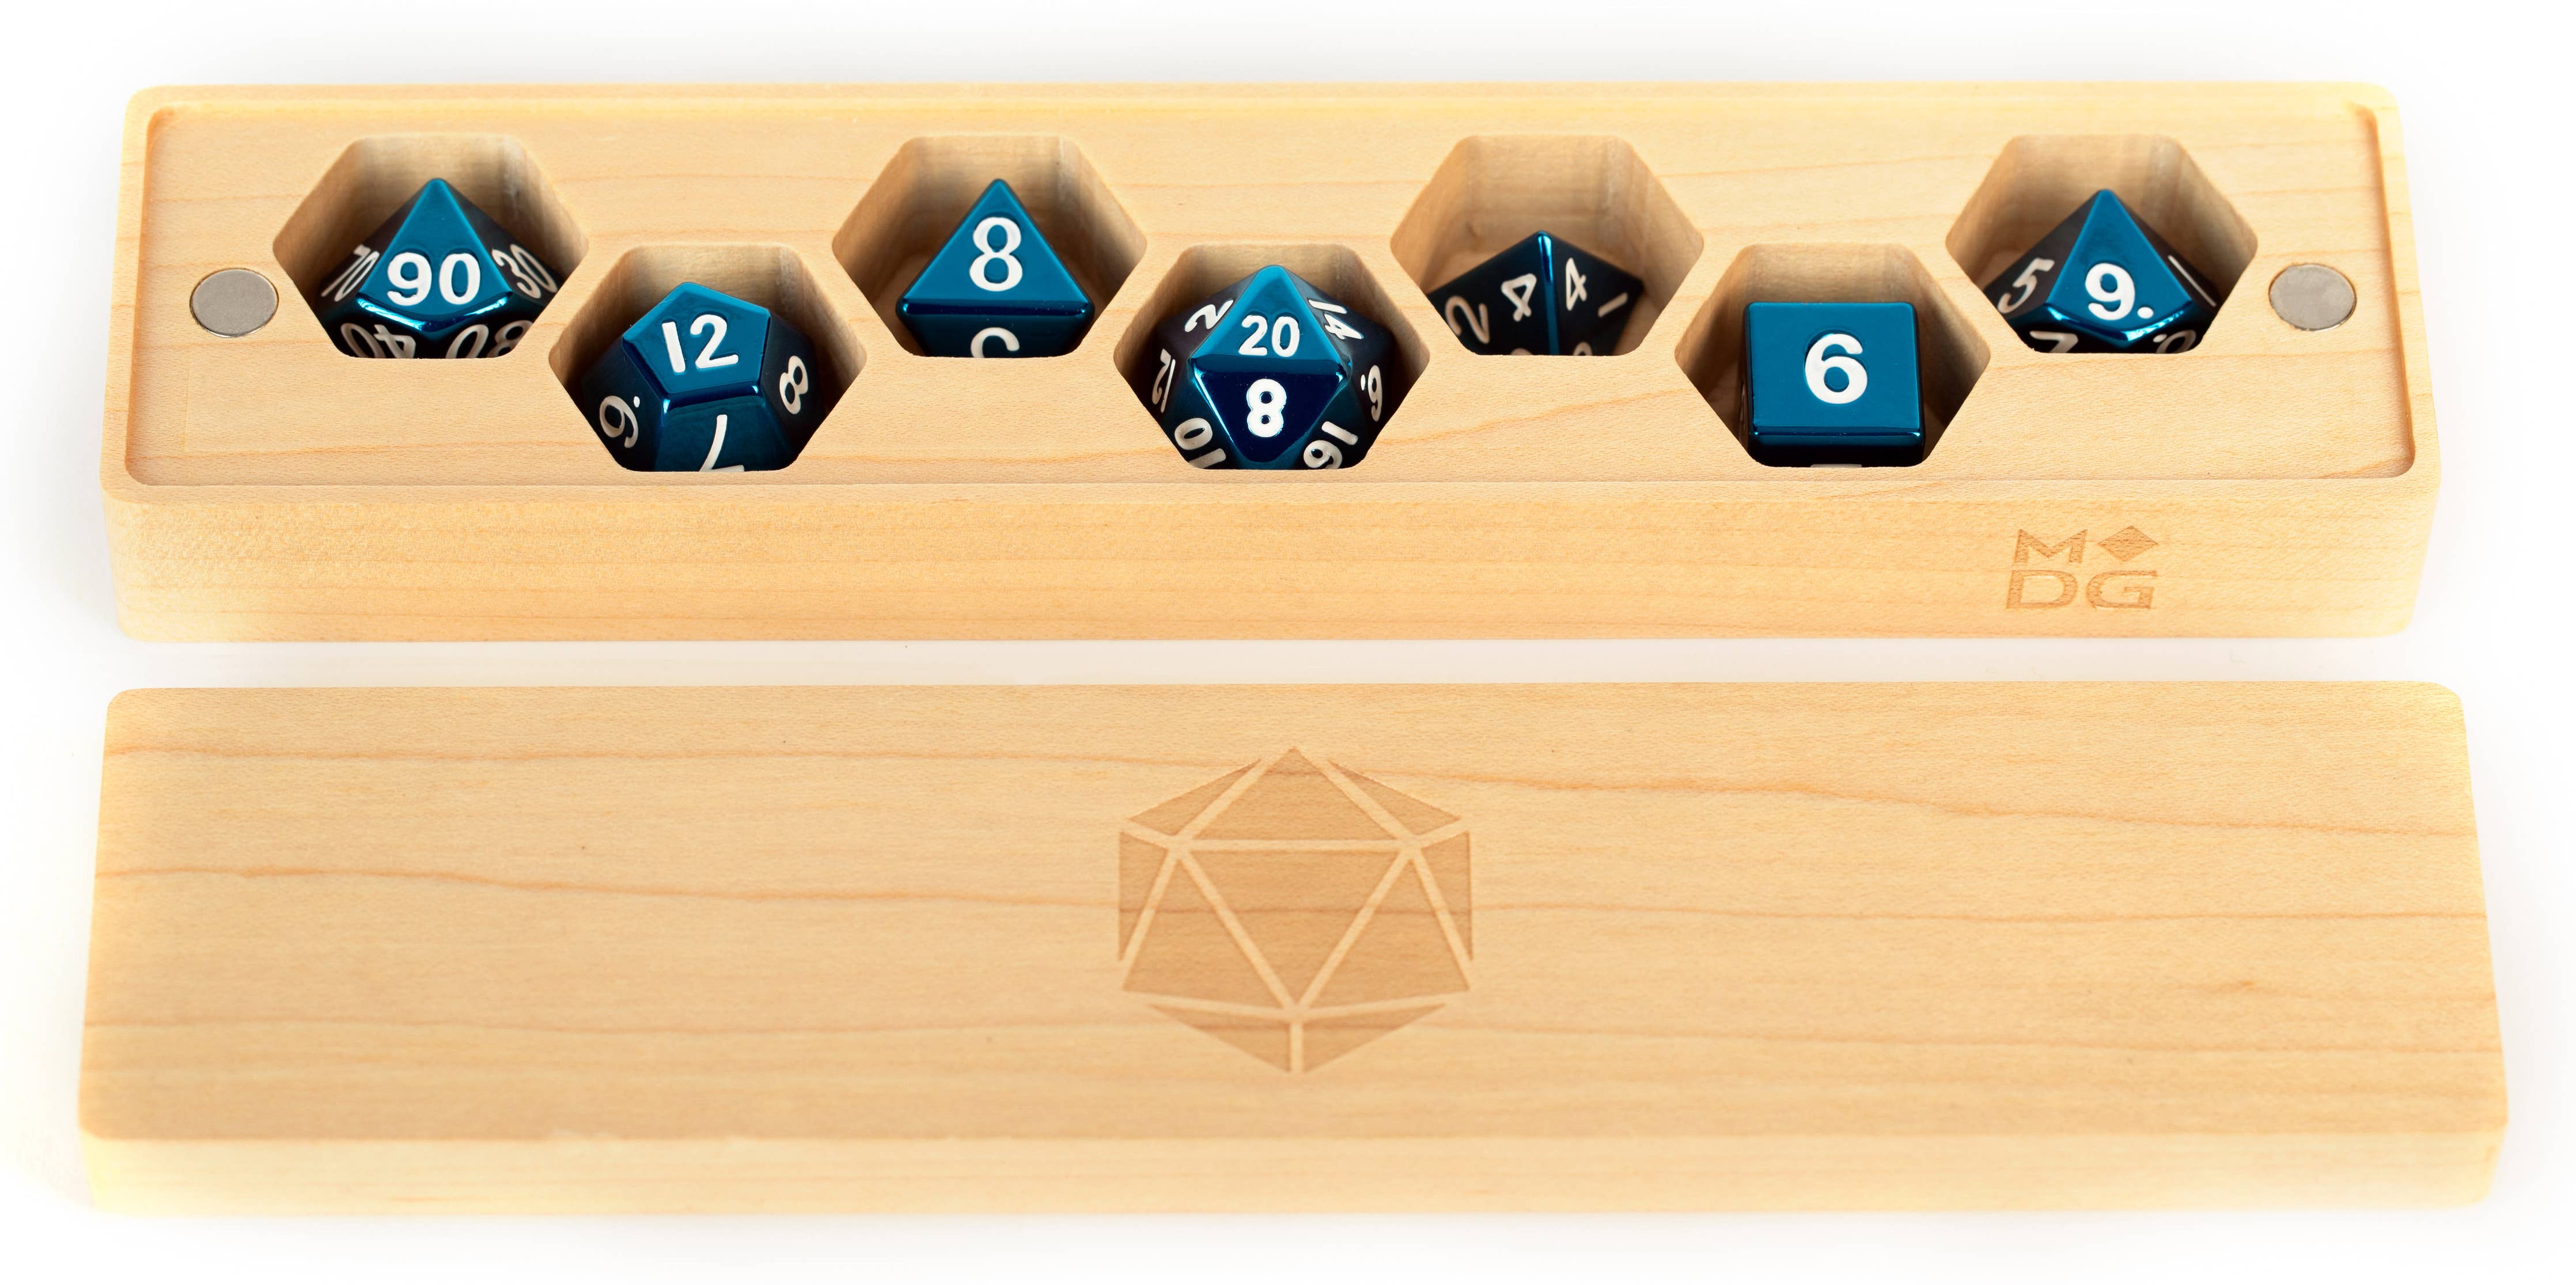 FanRoll by Metallic Dice Games - Wood Dice Cases: Vault Style Maple